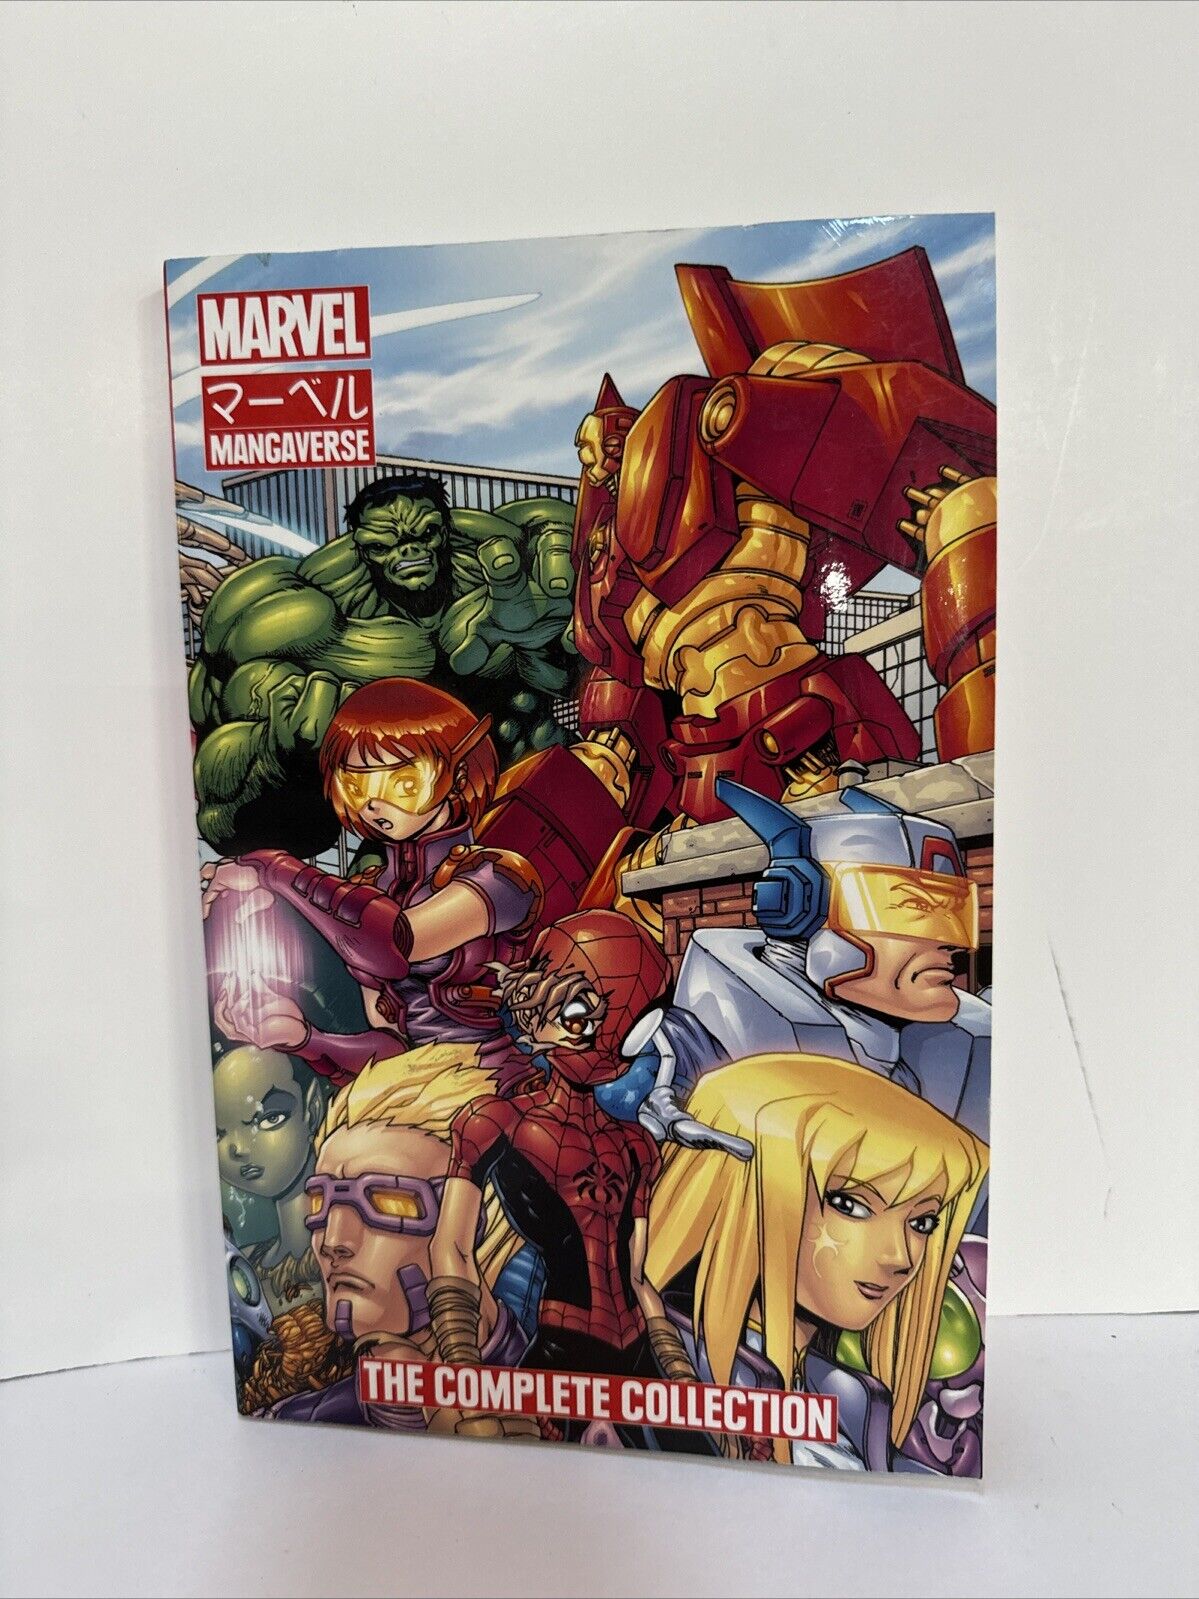 Marvel Mangaverse: the Complete Collection (Marvel Comics 2017)